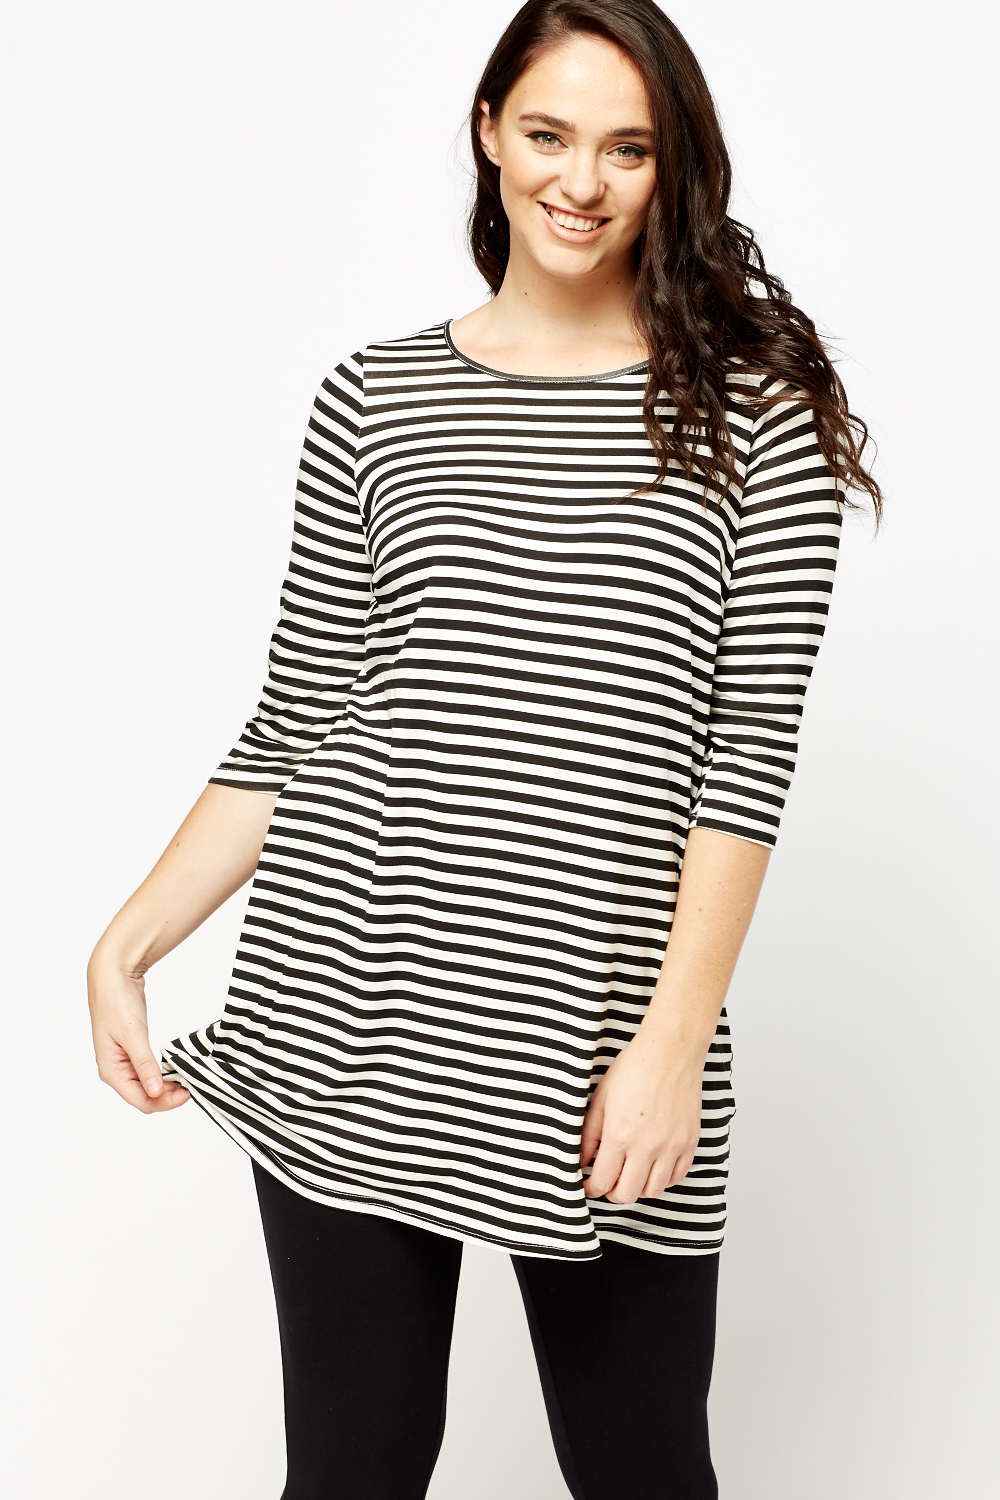 Striped Tunic Top - Just $7